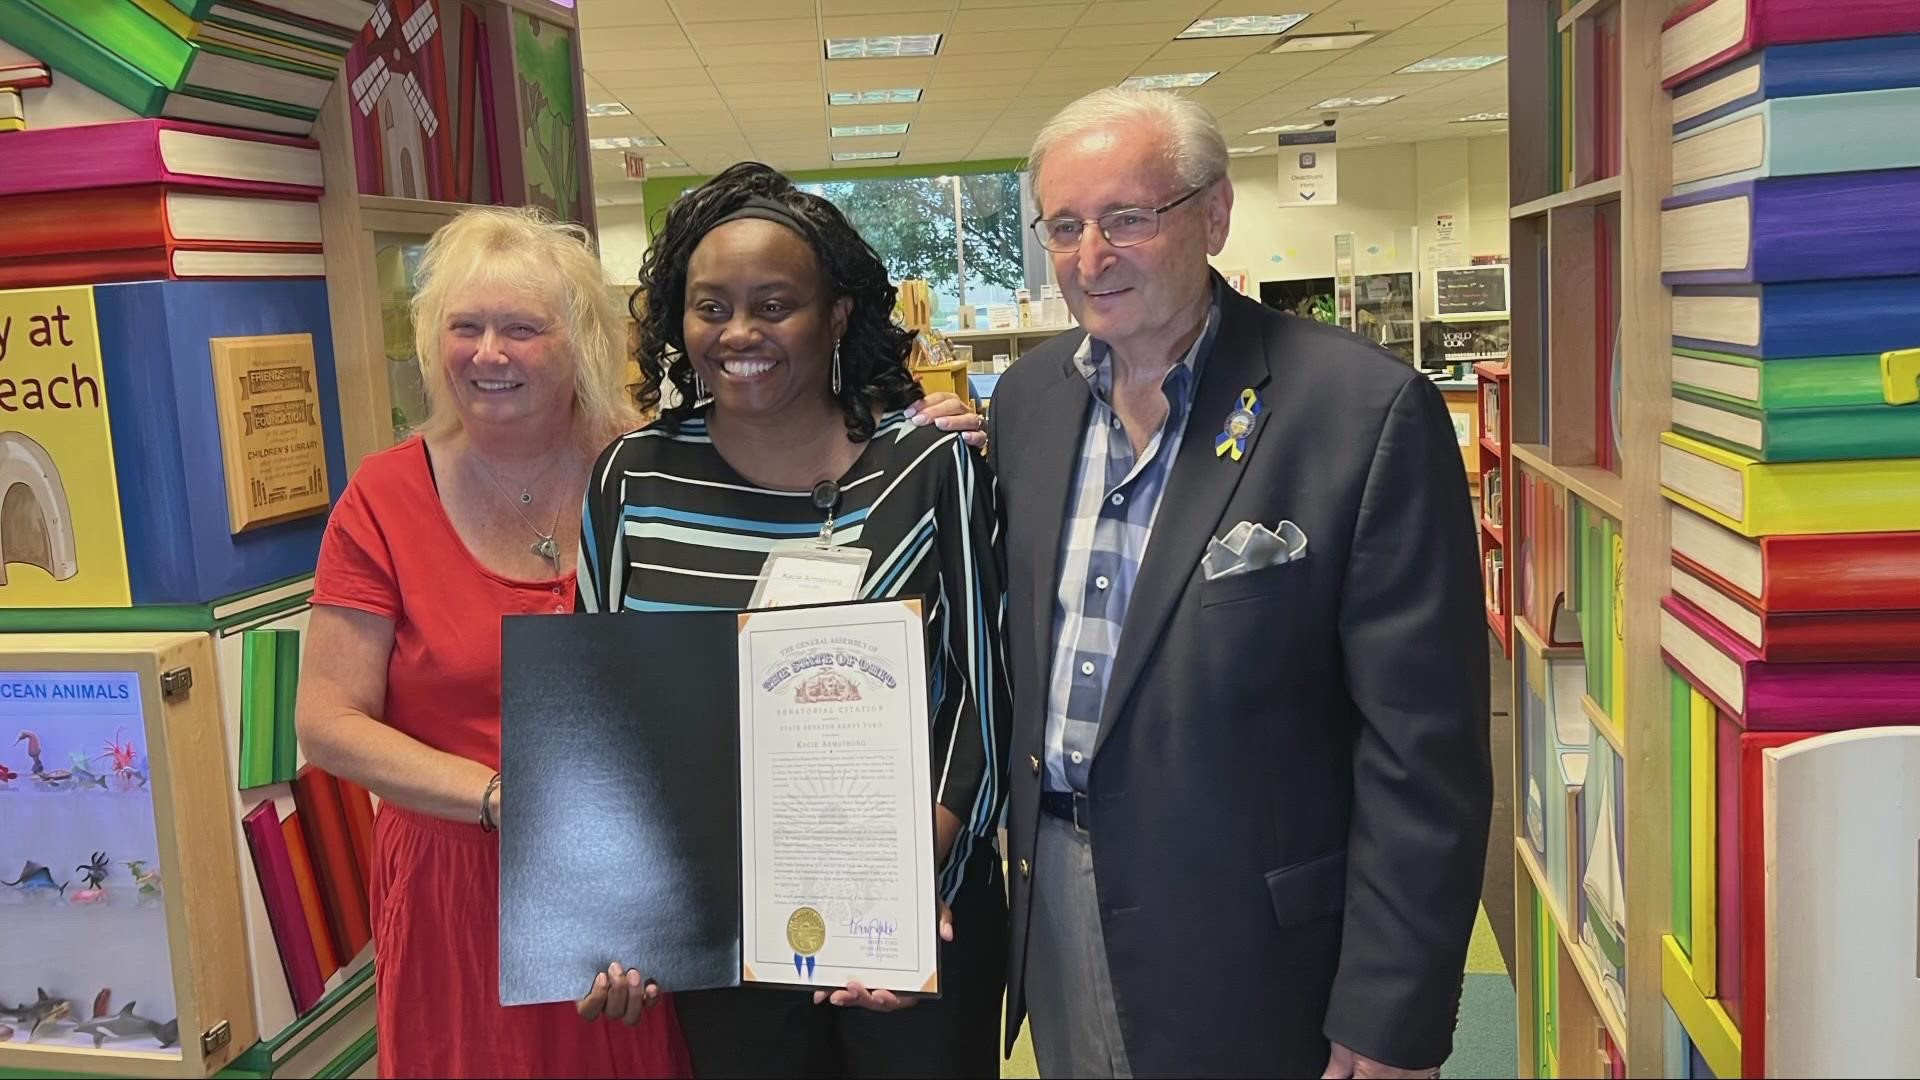 Kacie Armstrong has been walking the isles of libraries for more than a decade, and now she's being recognized for her hard work and dedication.